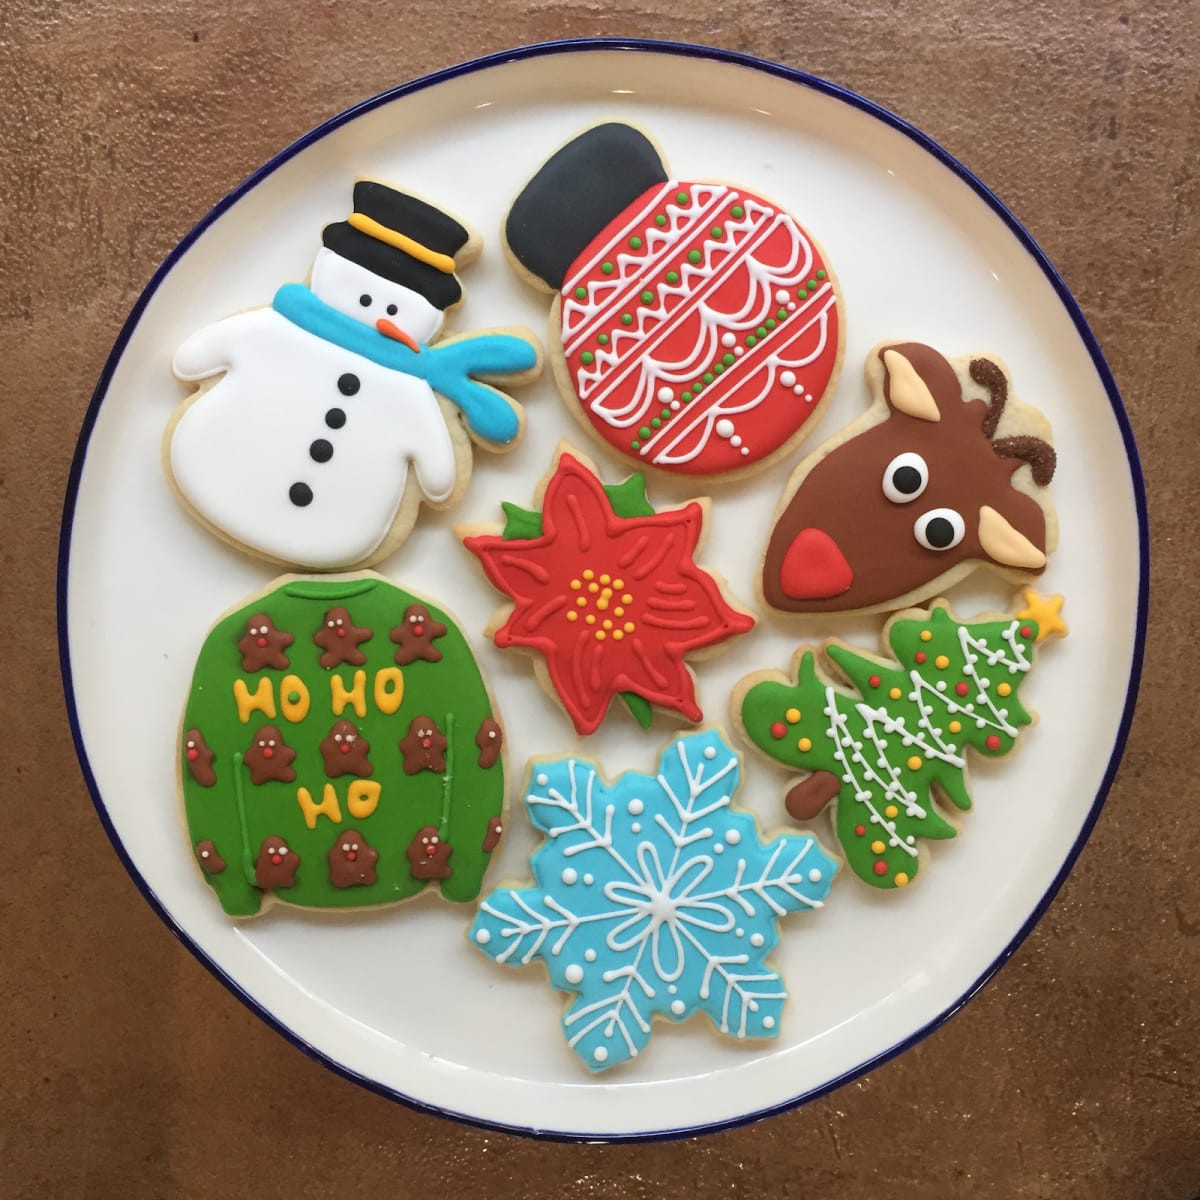 Ugly Christmas Cookies
 Ugly sweater cookies are must eat holiday treats from